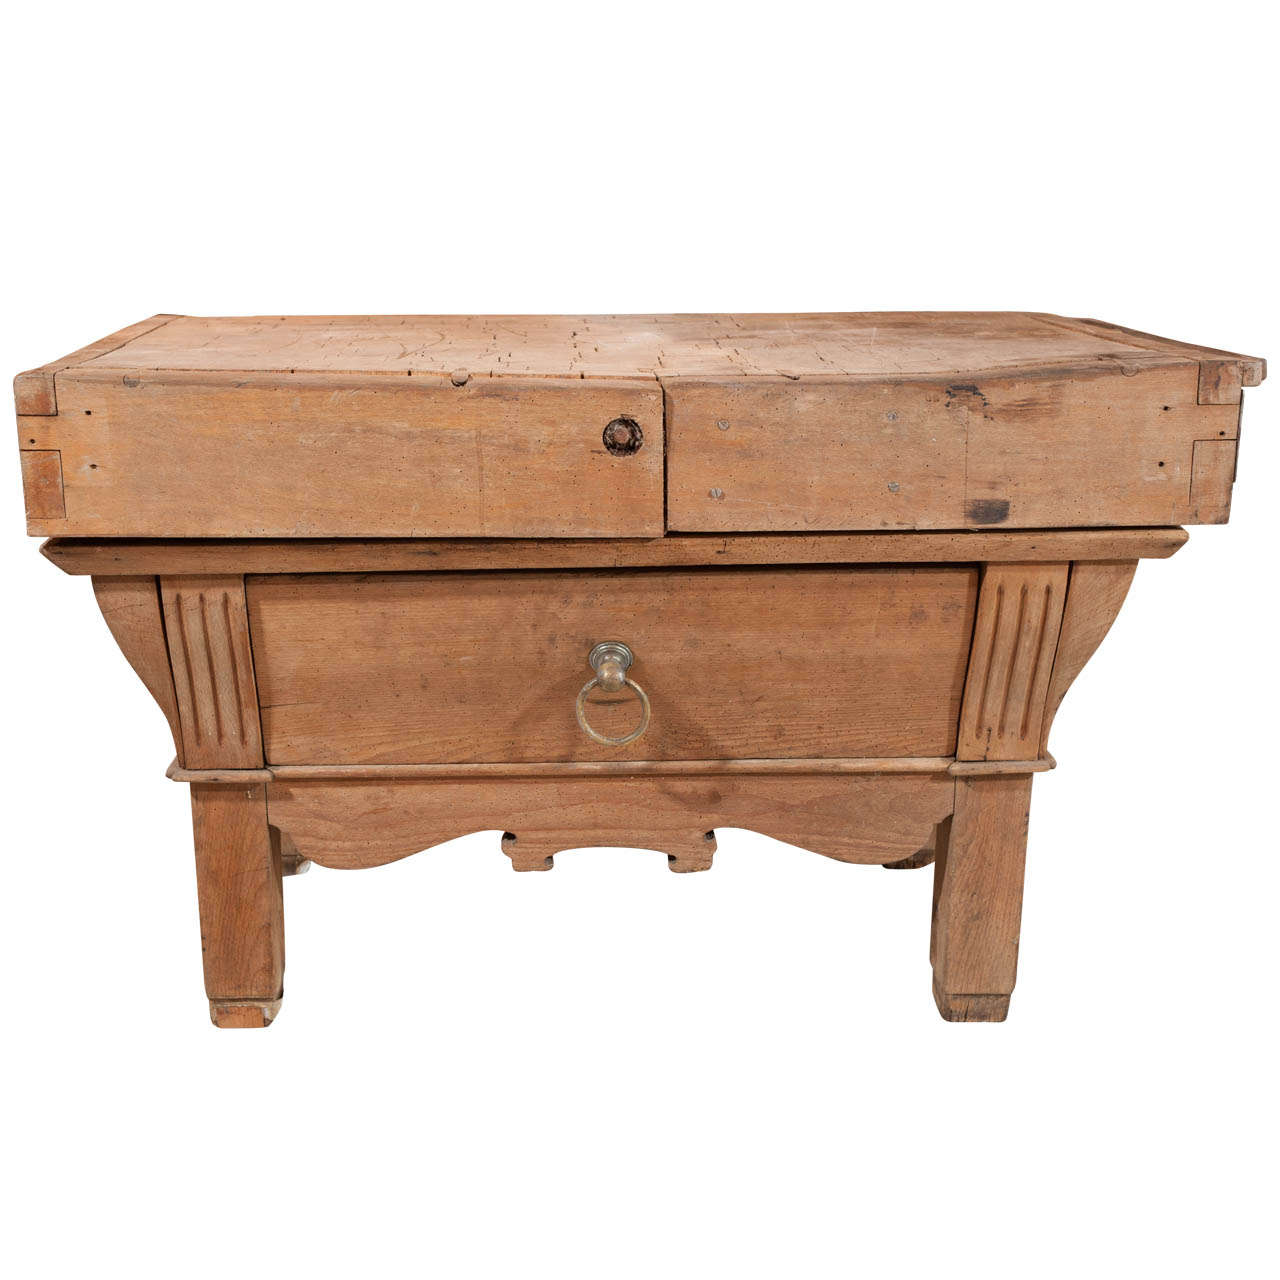 19th Century France Antique Wooden Bakers Counter circa 1860 For Sale